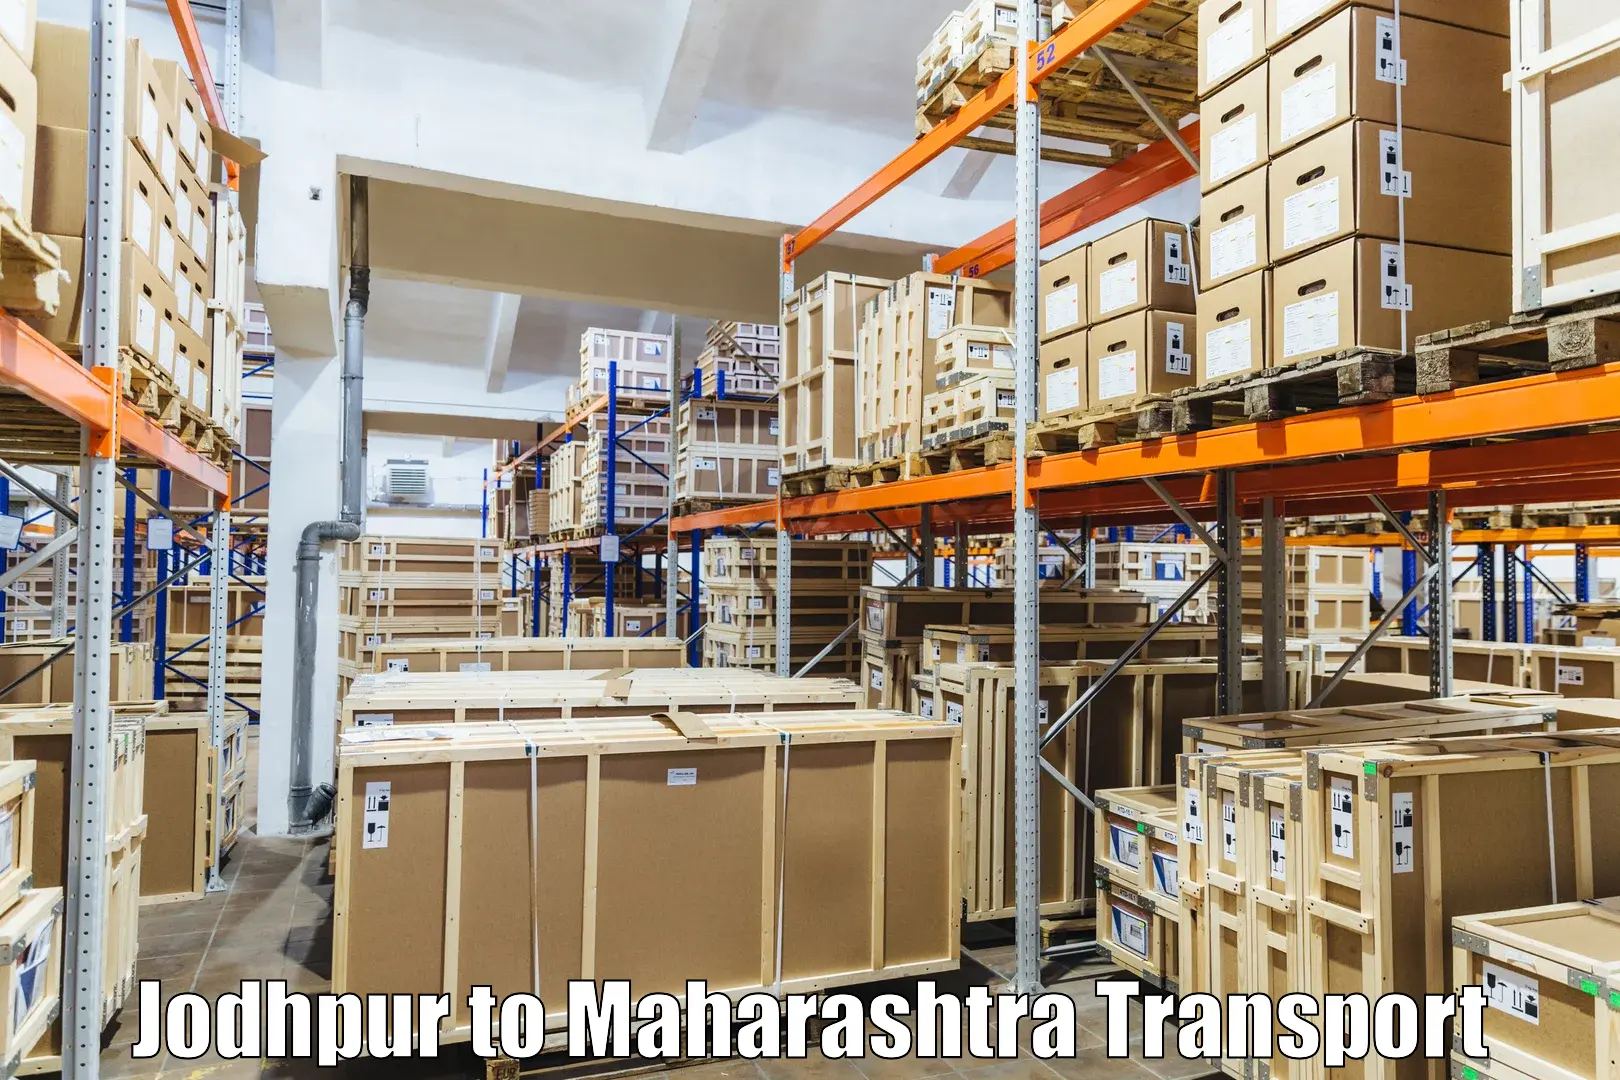 Goods delivery service Jodhpur to Madgyal